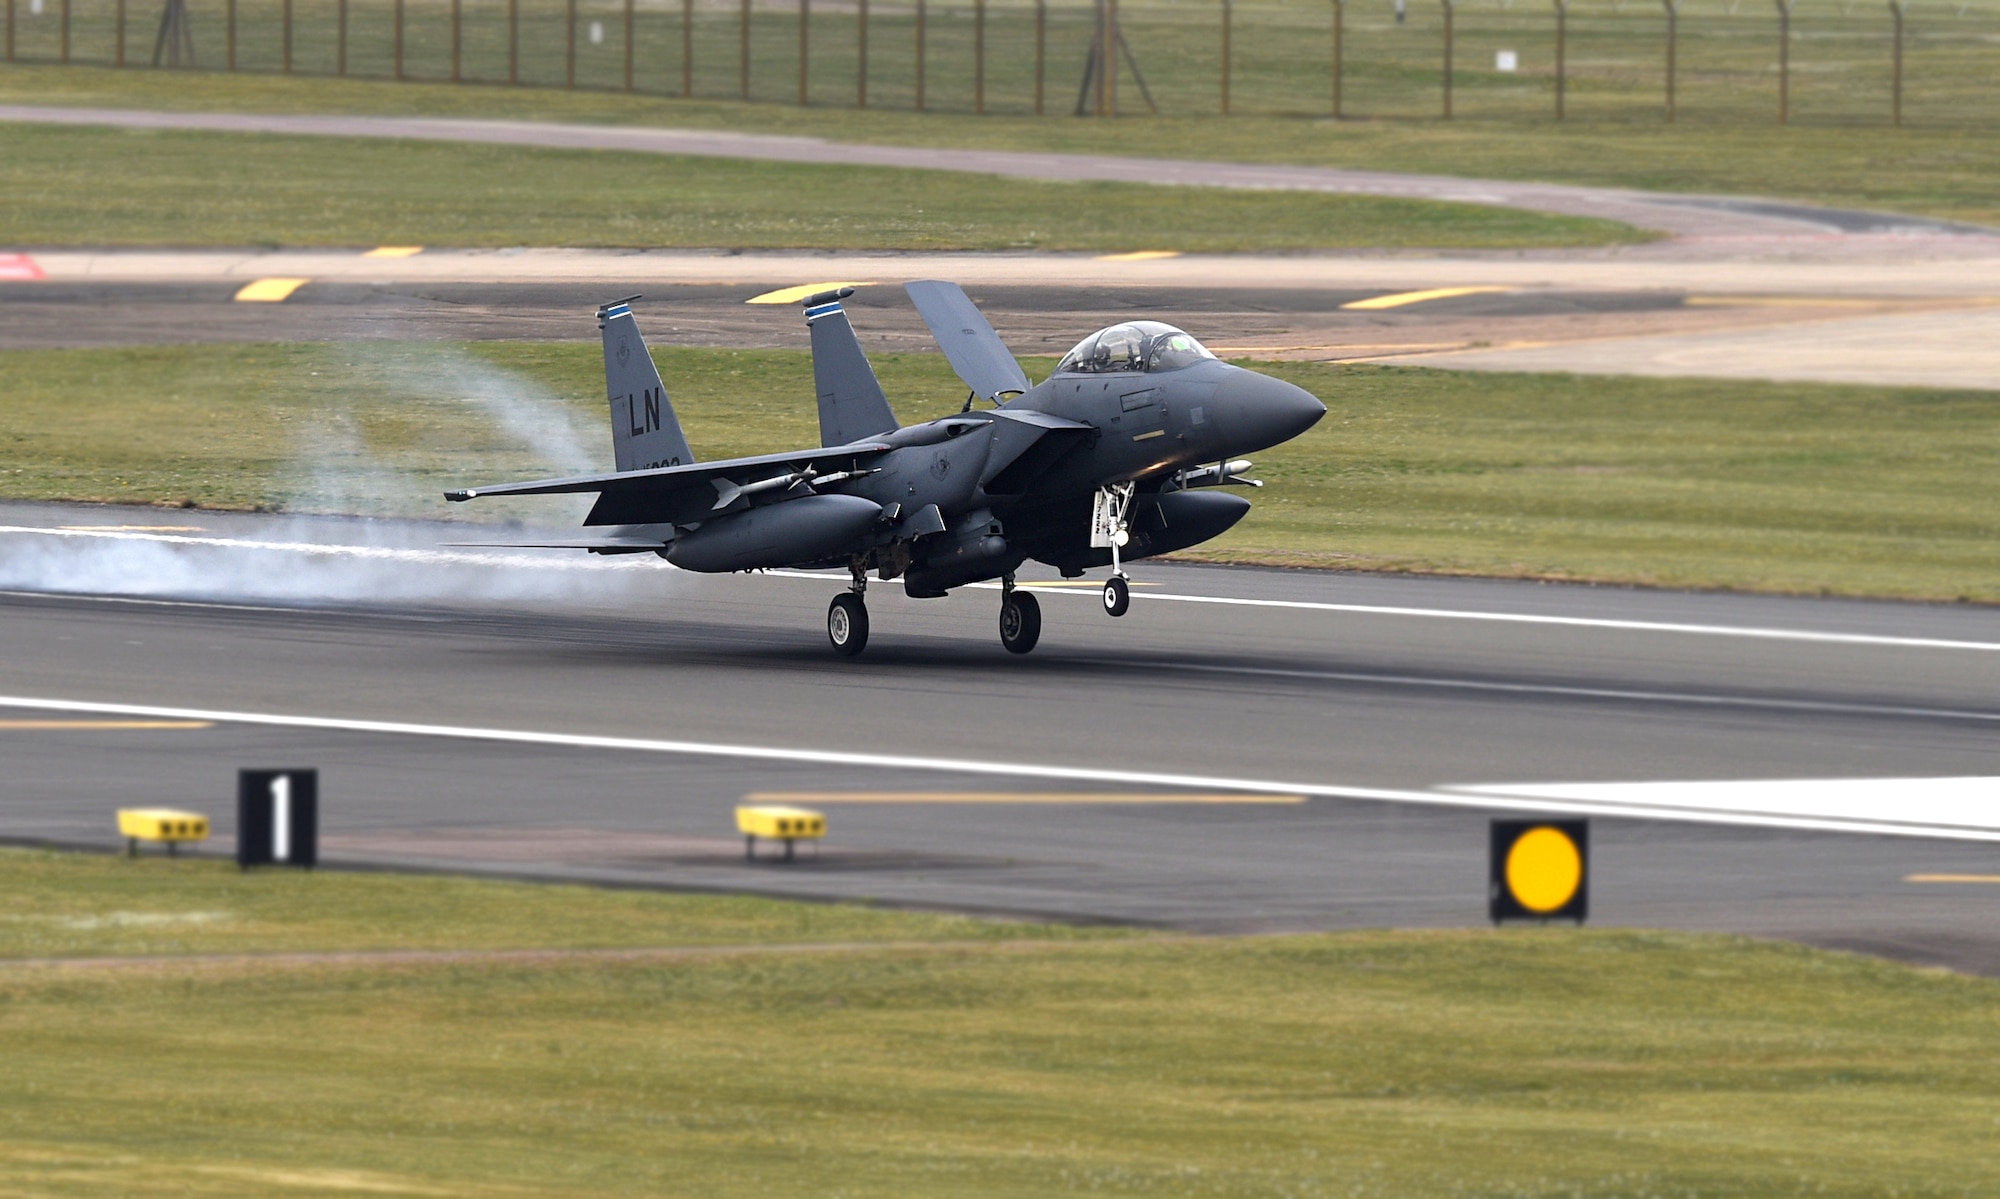 An F-15E Strike Eagle assigned to the 492nd Fighter Squadron lands on the flight line at Royal Air Force Lakenheath, England, April 23, 2019. The 48th Fighter Wing is participating in a readiness exercise from 23-25 April focused on continuous operations over a 48-hour period. (U.S. Air Force photo by Airman 1st Class Madeline Herzog)